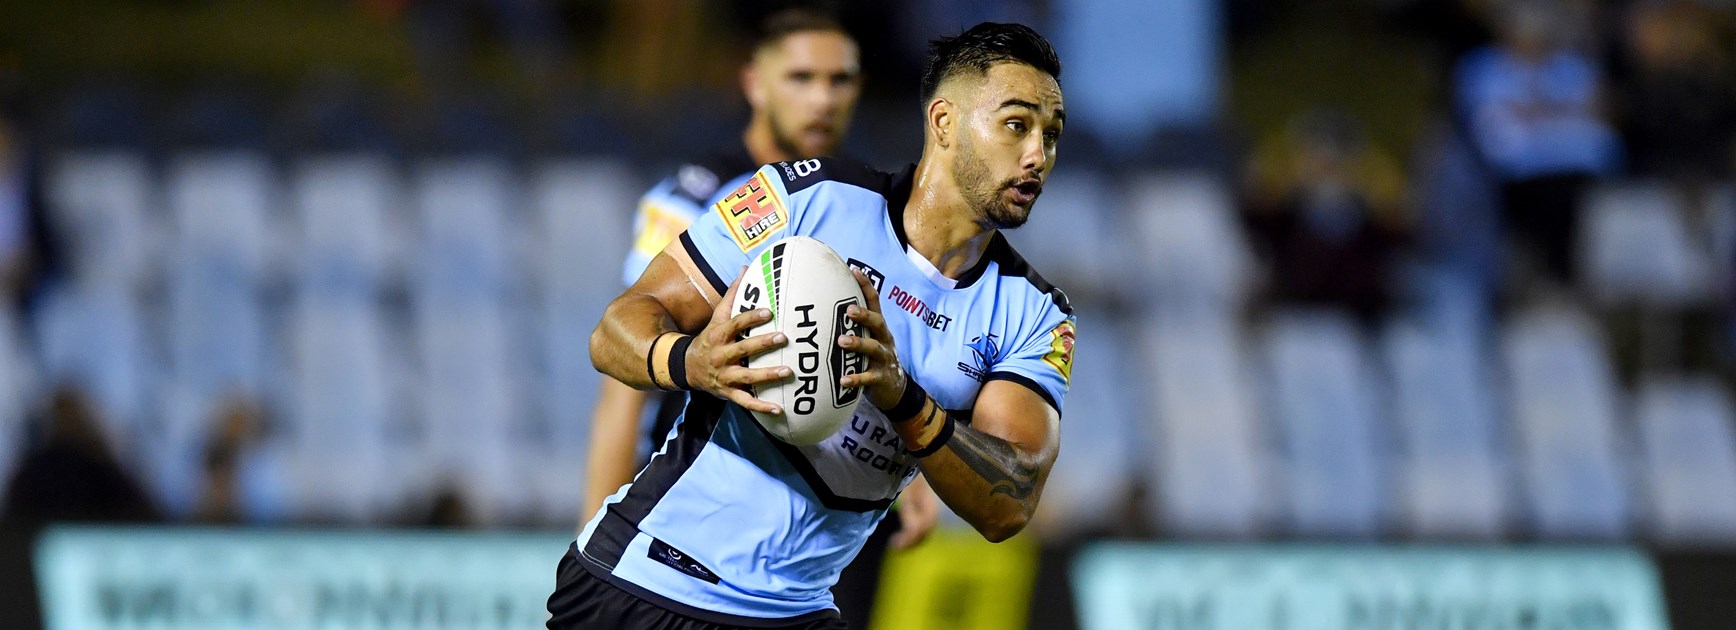 Nikora re-signs with Cronulla until end of 2022